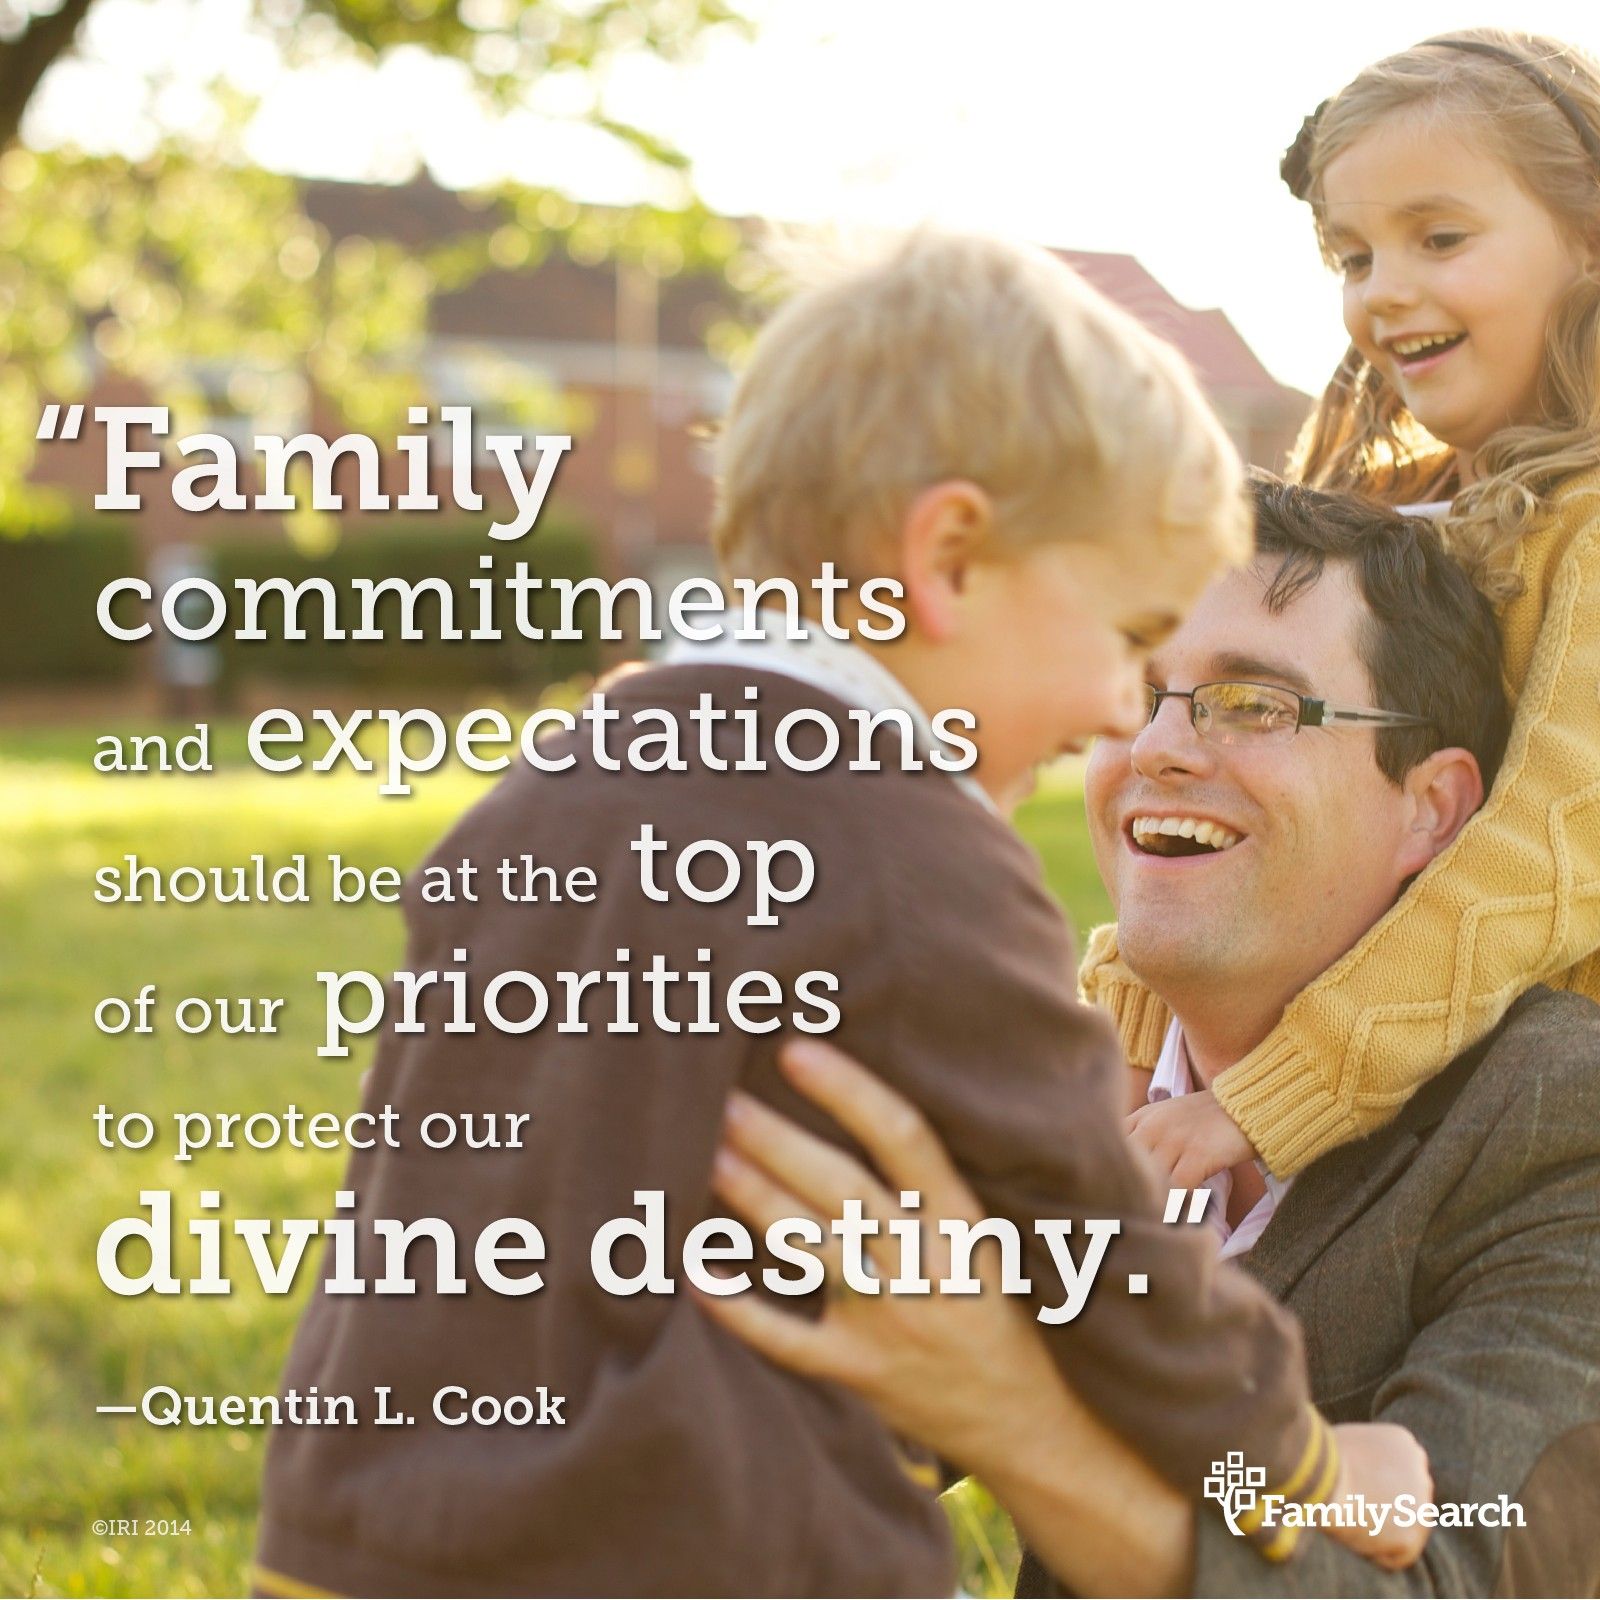 “Family commitments and expectations should be at the top of our priorities to protect our divine destiny.”—Elder Quentin L. Cook, “Roots and Branches”